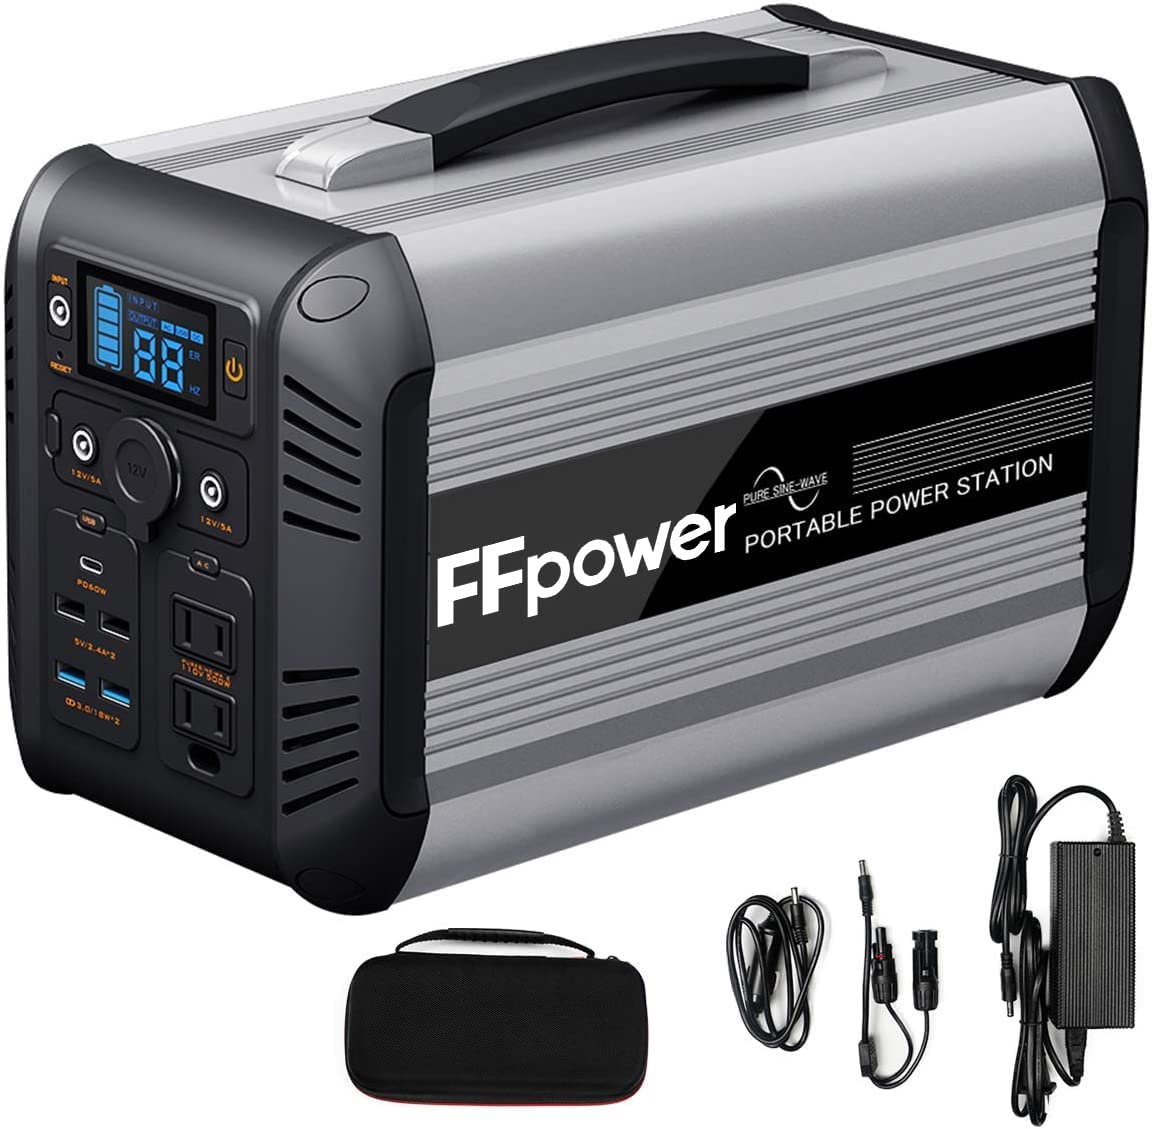 FFpower 614Wh Portable Power Station CN505, Solar Generator 500W with PD 60W USB-C, 110V Power Supply AC Outlet for Outdoor Camping, 192000mah LiFePO4 Battery for Emergency Hurricane Supplies